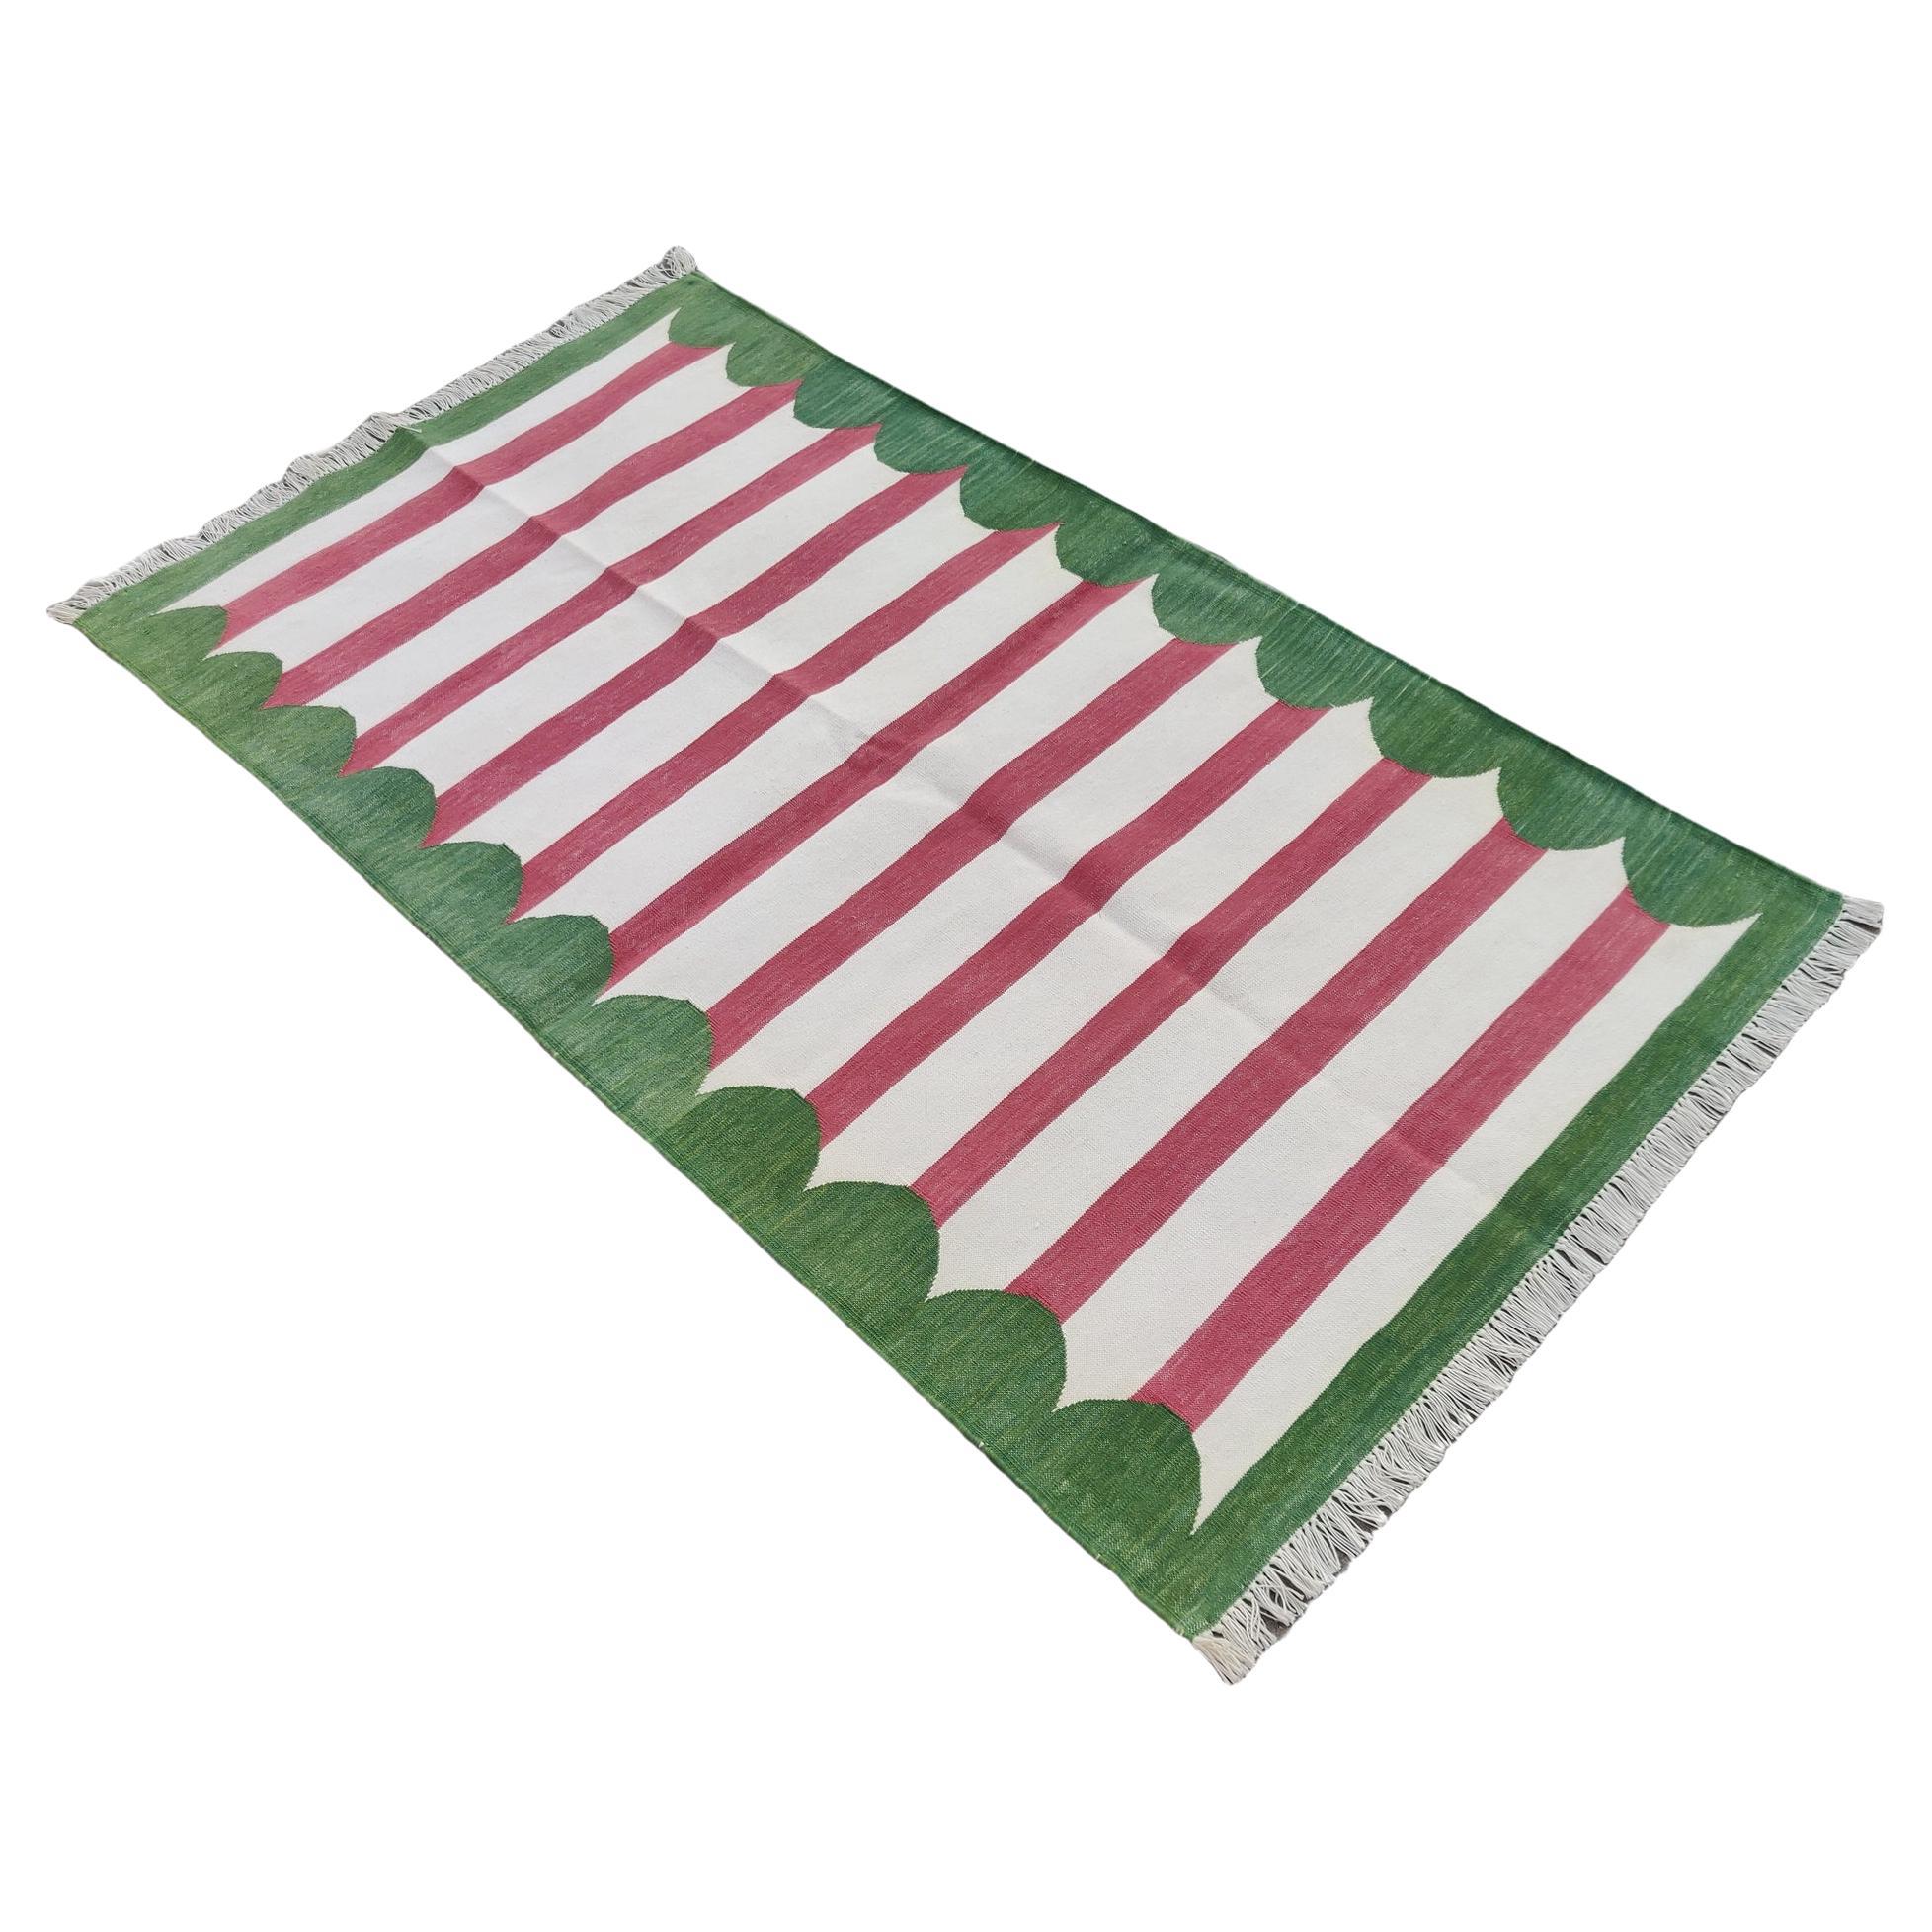 Handmade Cotton Area Flat Weave Rug, 3x5 Pink And Green Striped Indian Dhurrie